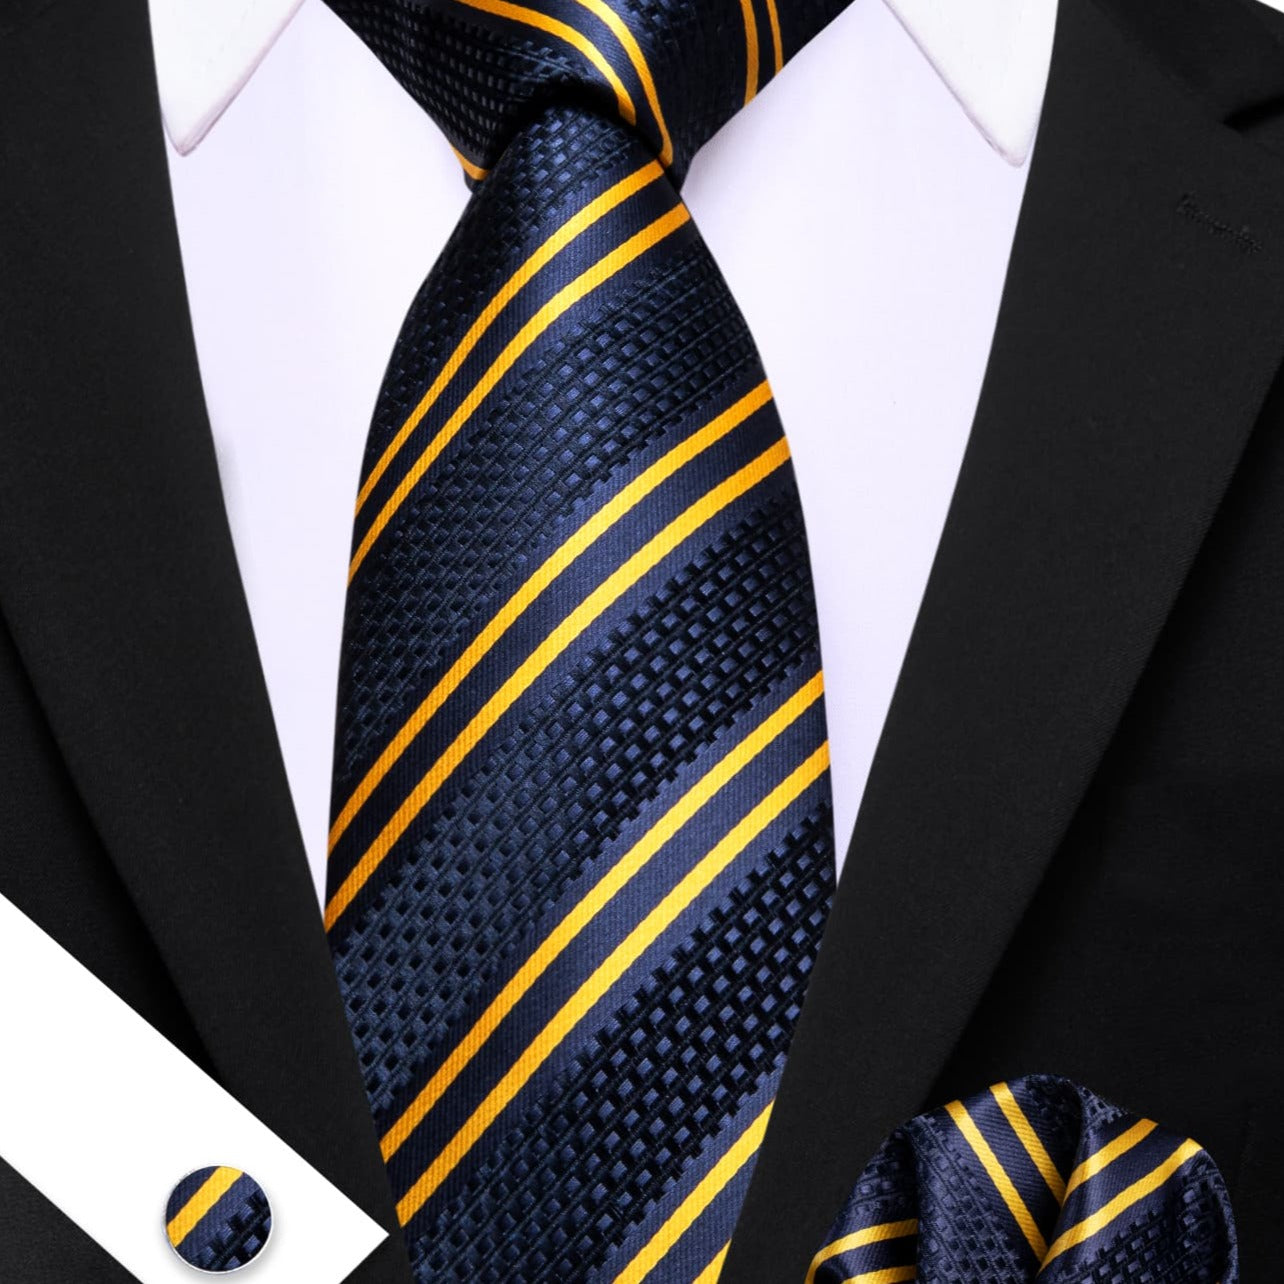  Blue Striped Tie with Yellow Stripes Men's Business Set